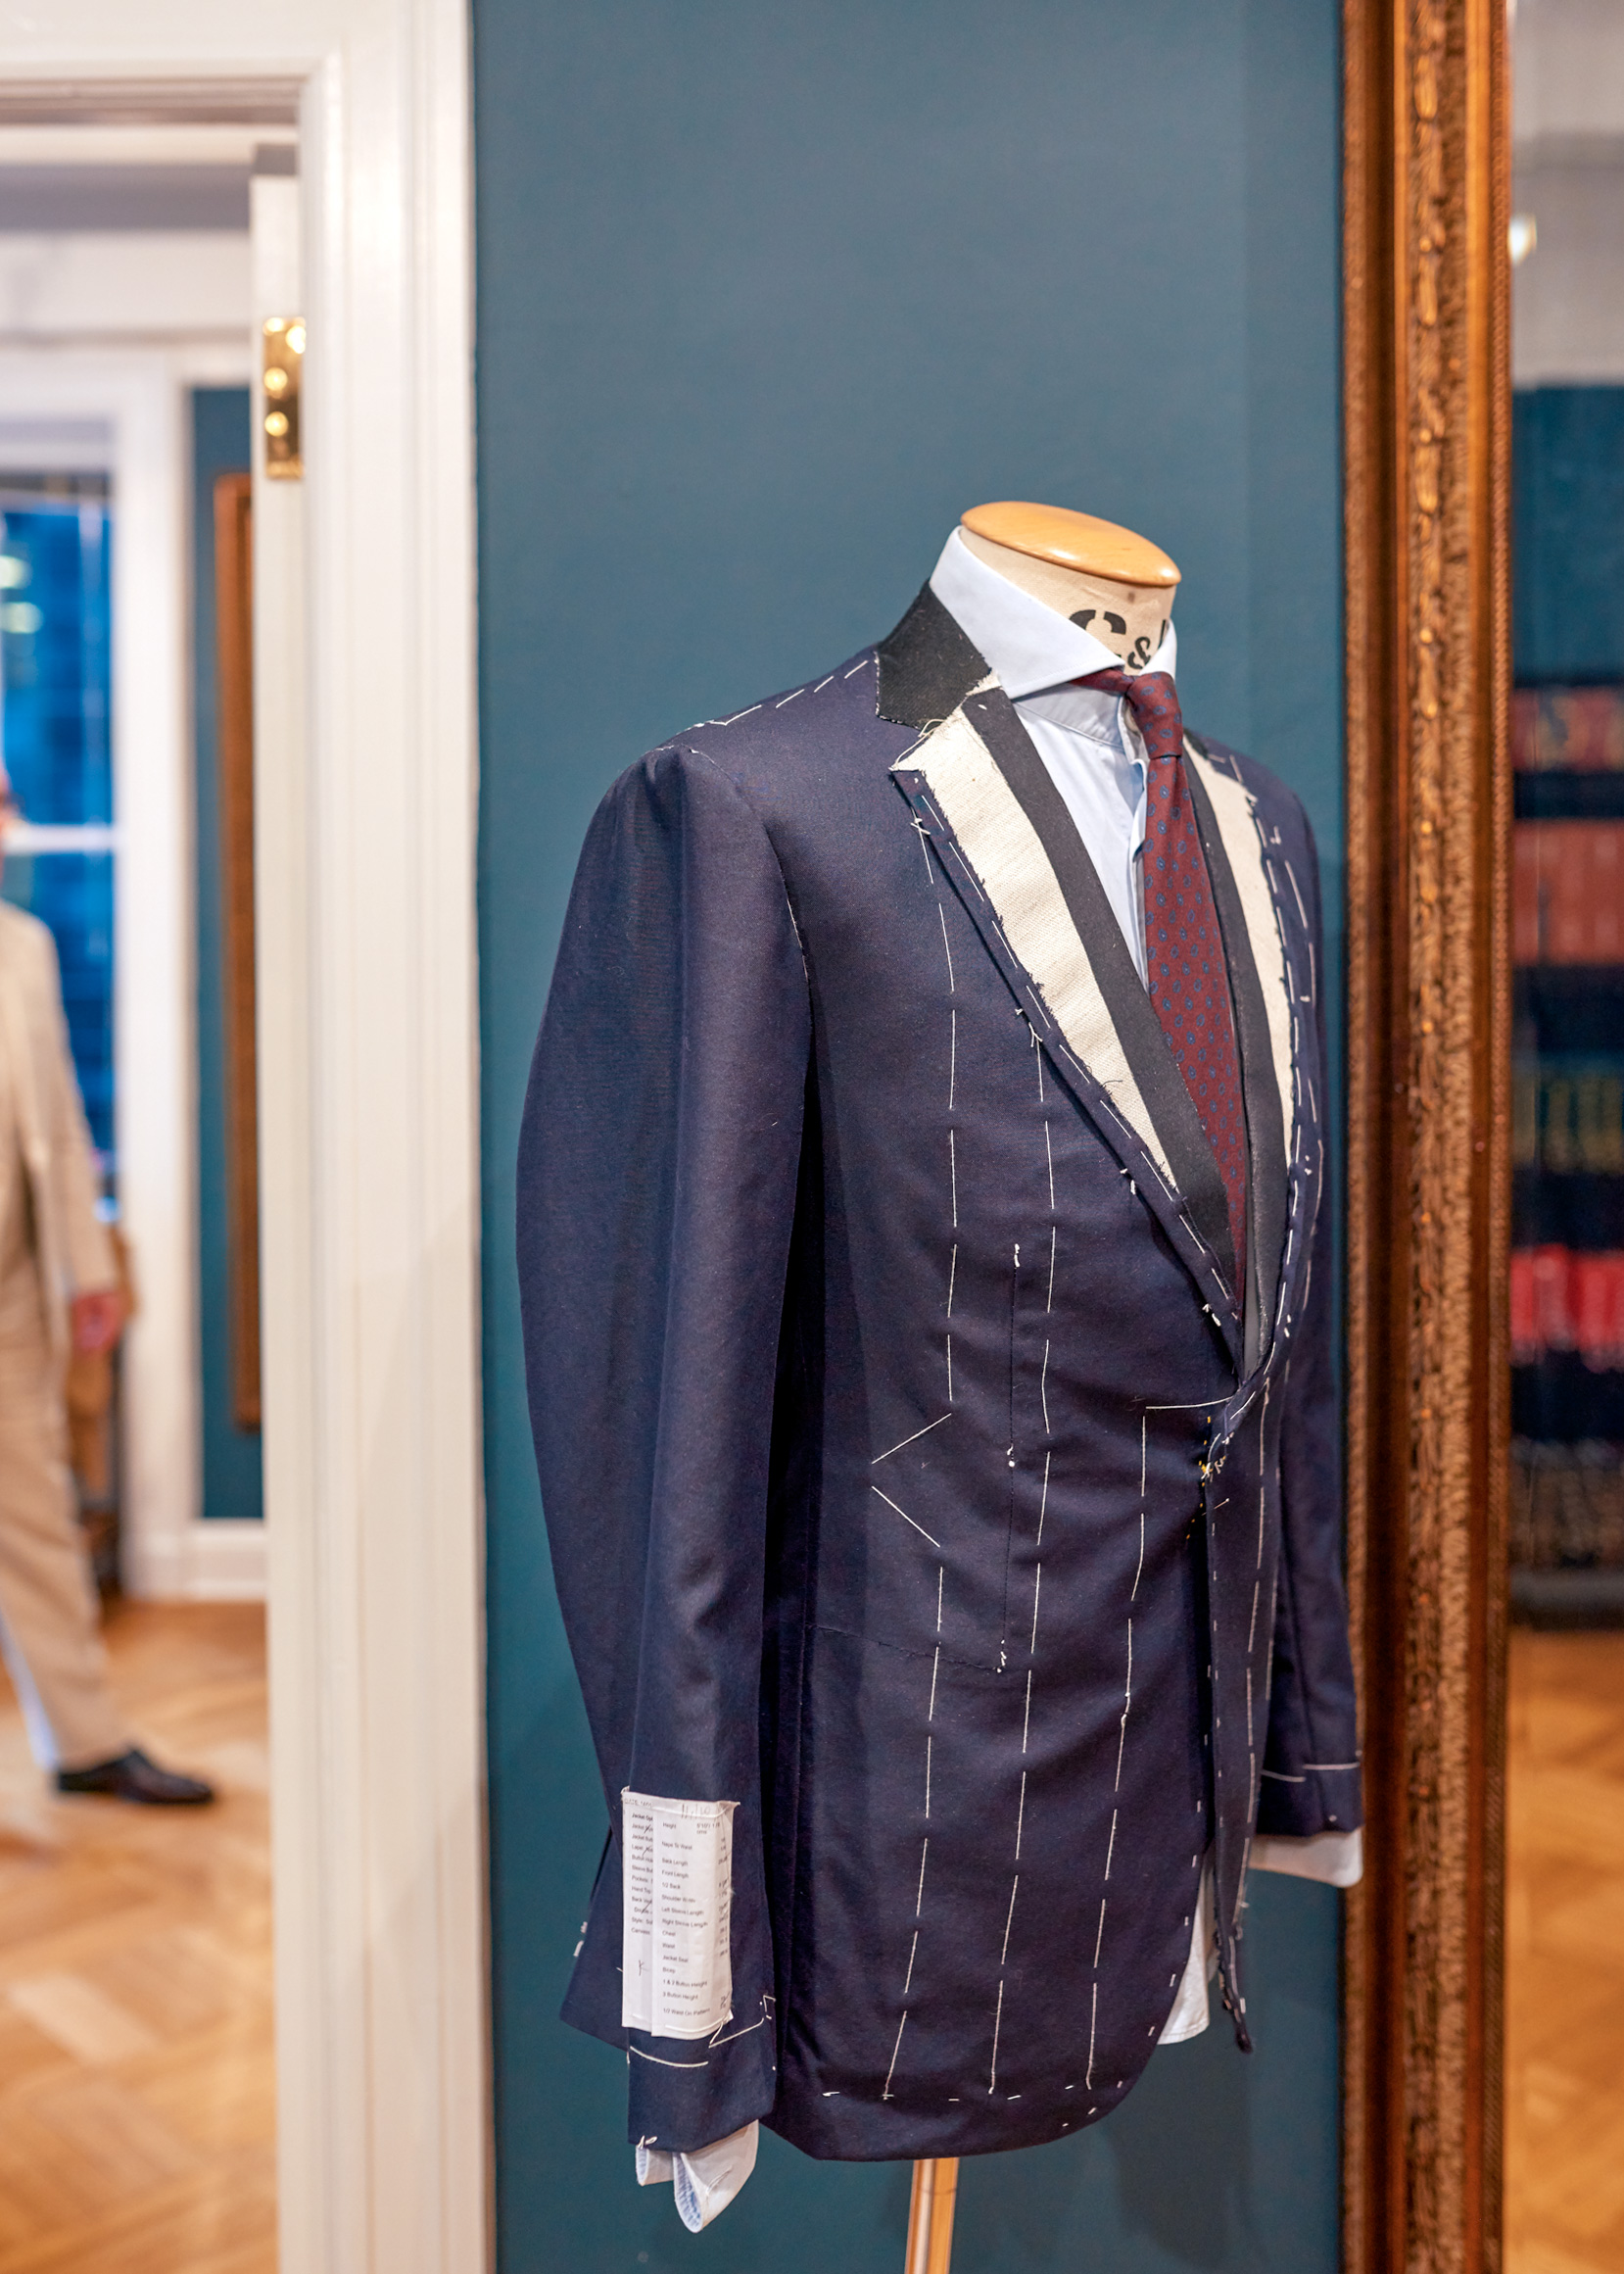 A SHOT OF A MANNEQUIN DONNING THE OUTFIT OF LAYERS OF A SUIT